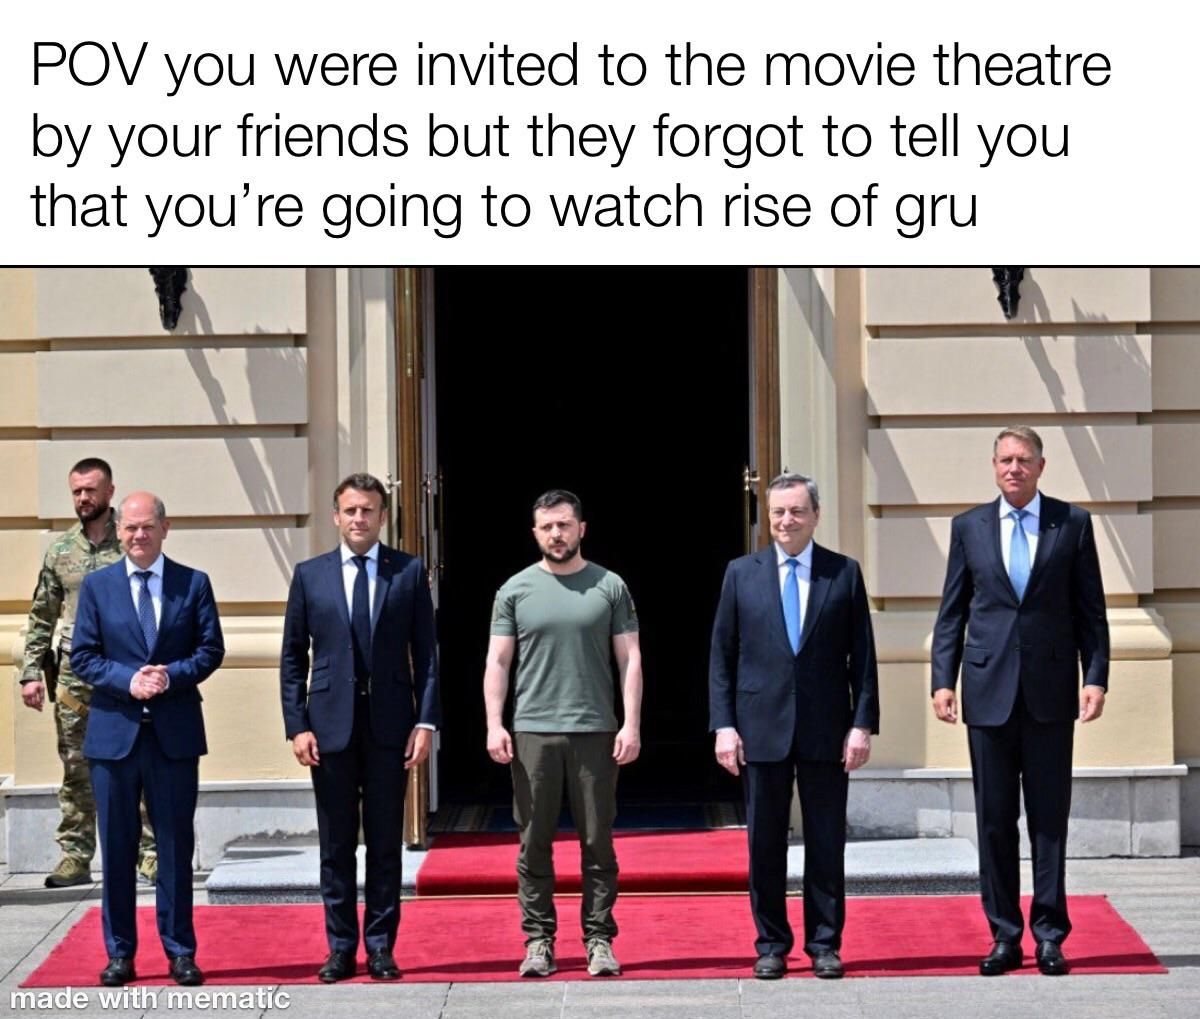 Rise of gru was mid